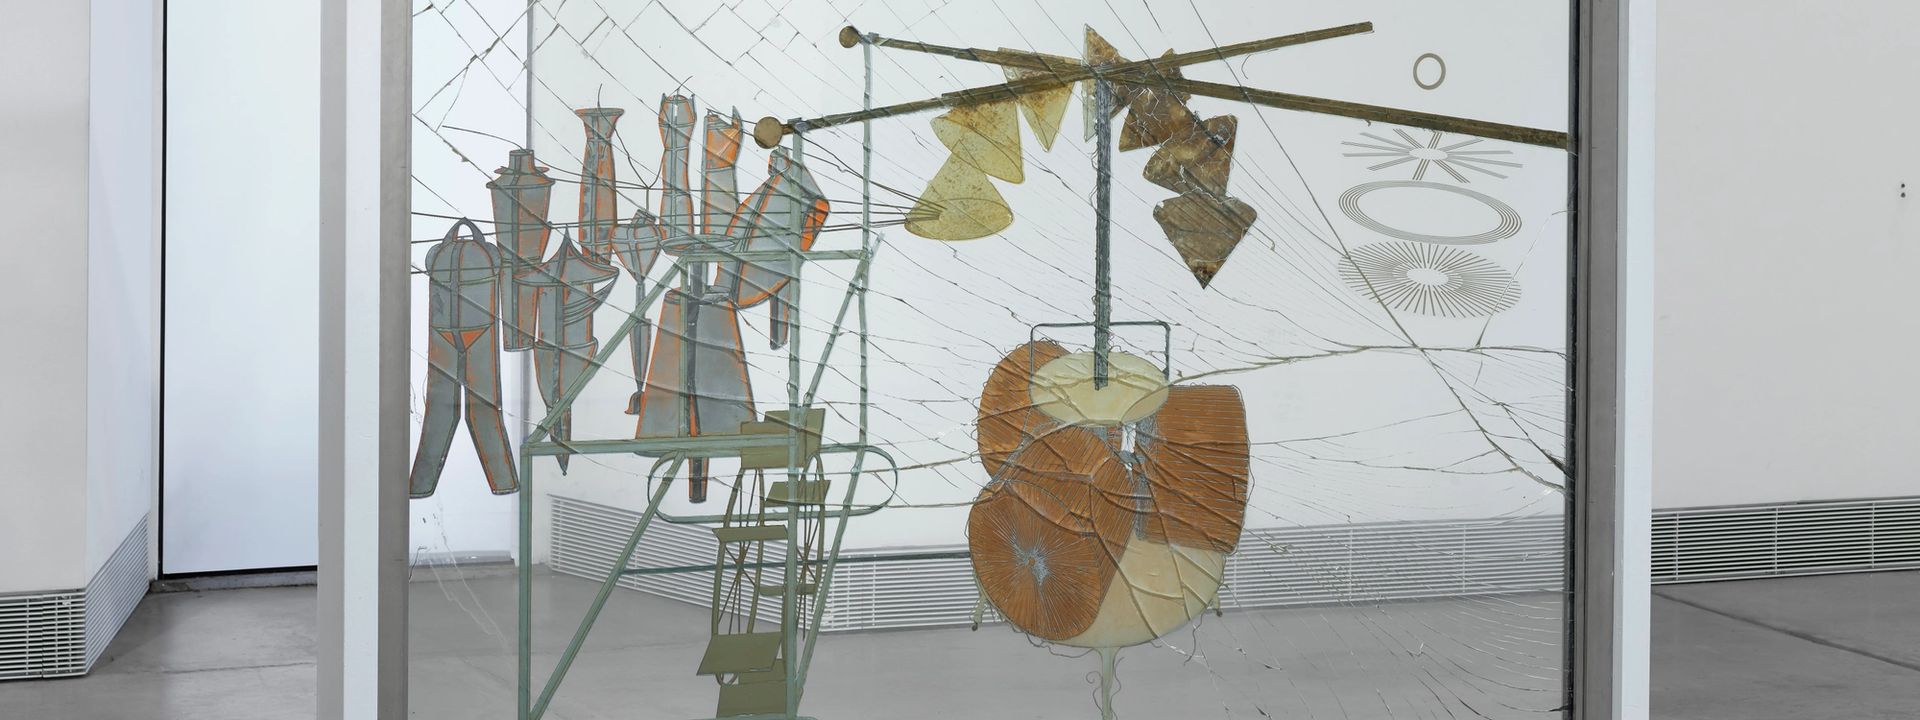 The Bride Stripped Bare by Her Bachelors, Even (The Large Glass), 1915–23, by Marcel Duchamp